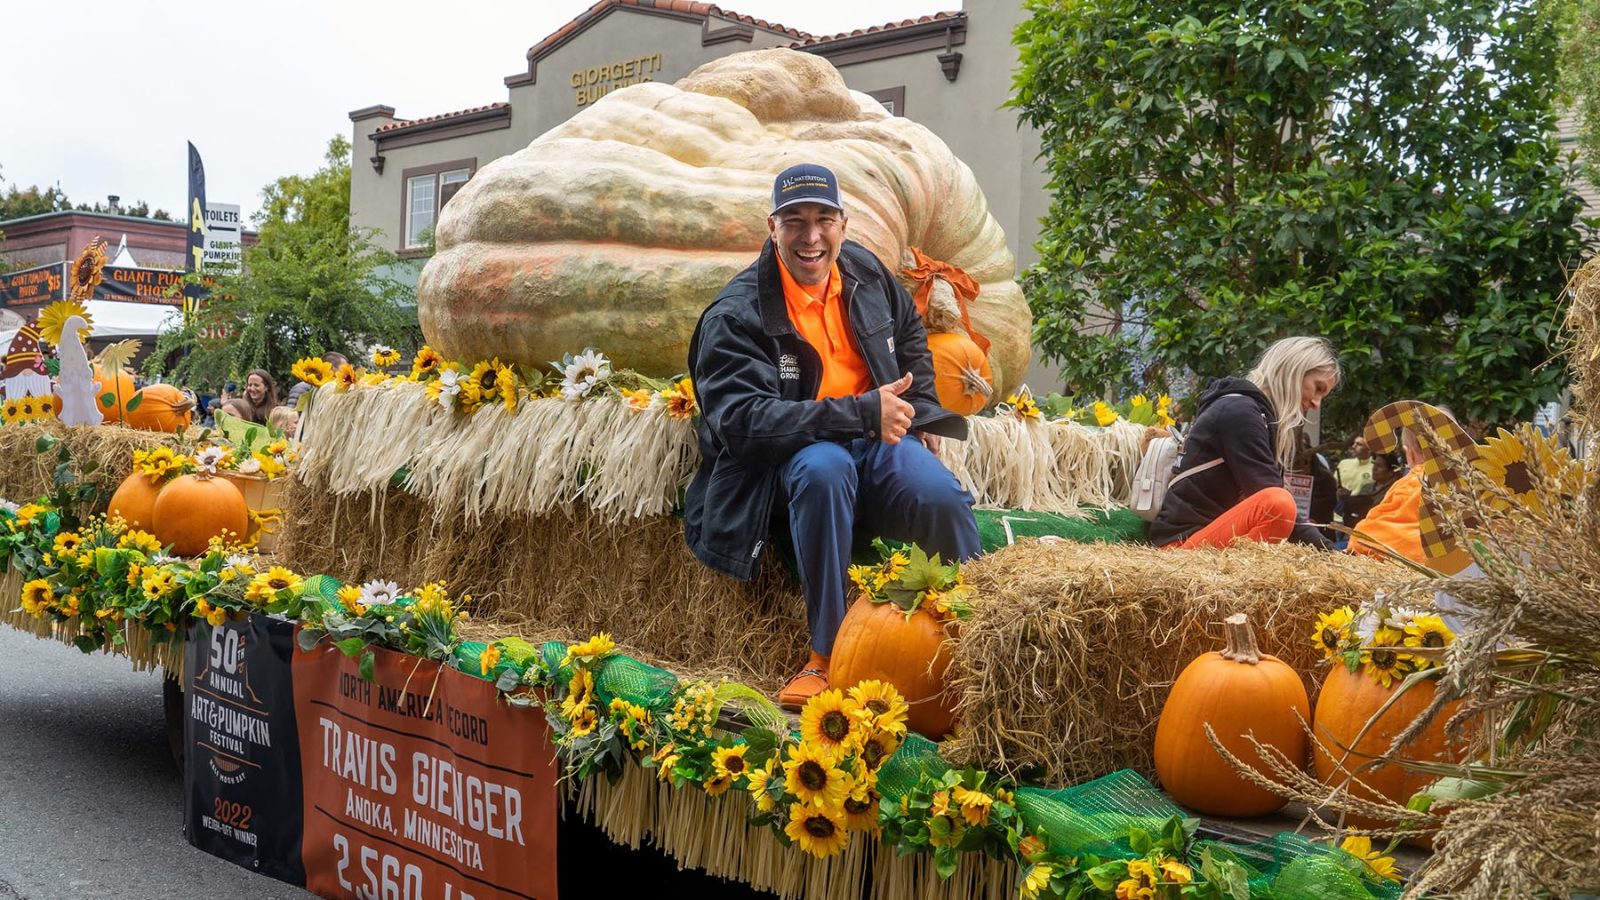 activities-parade-weigh-off-champ-travis-gienger-on-float-2022-300dpi